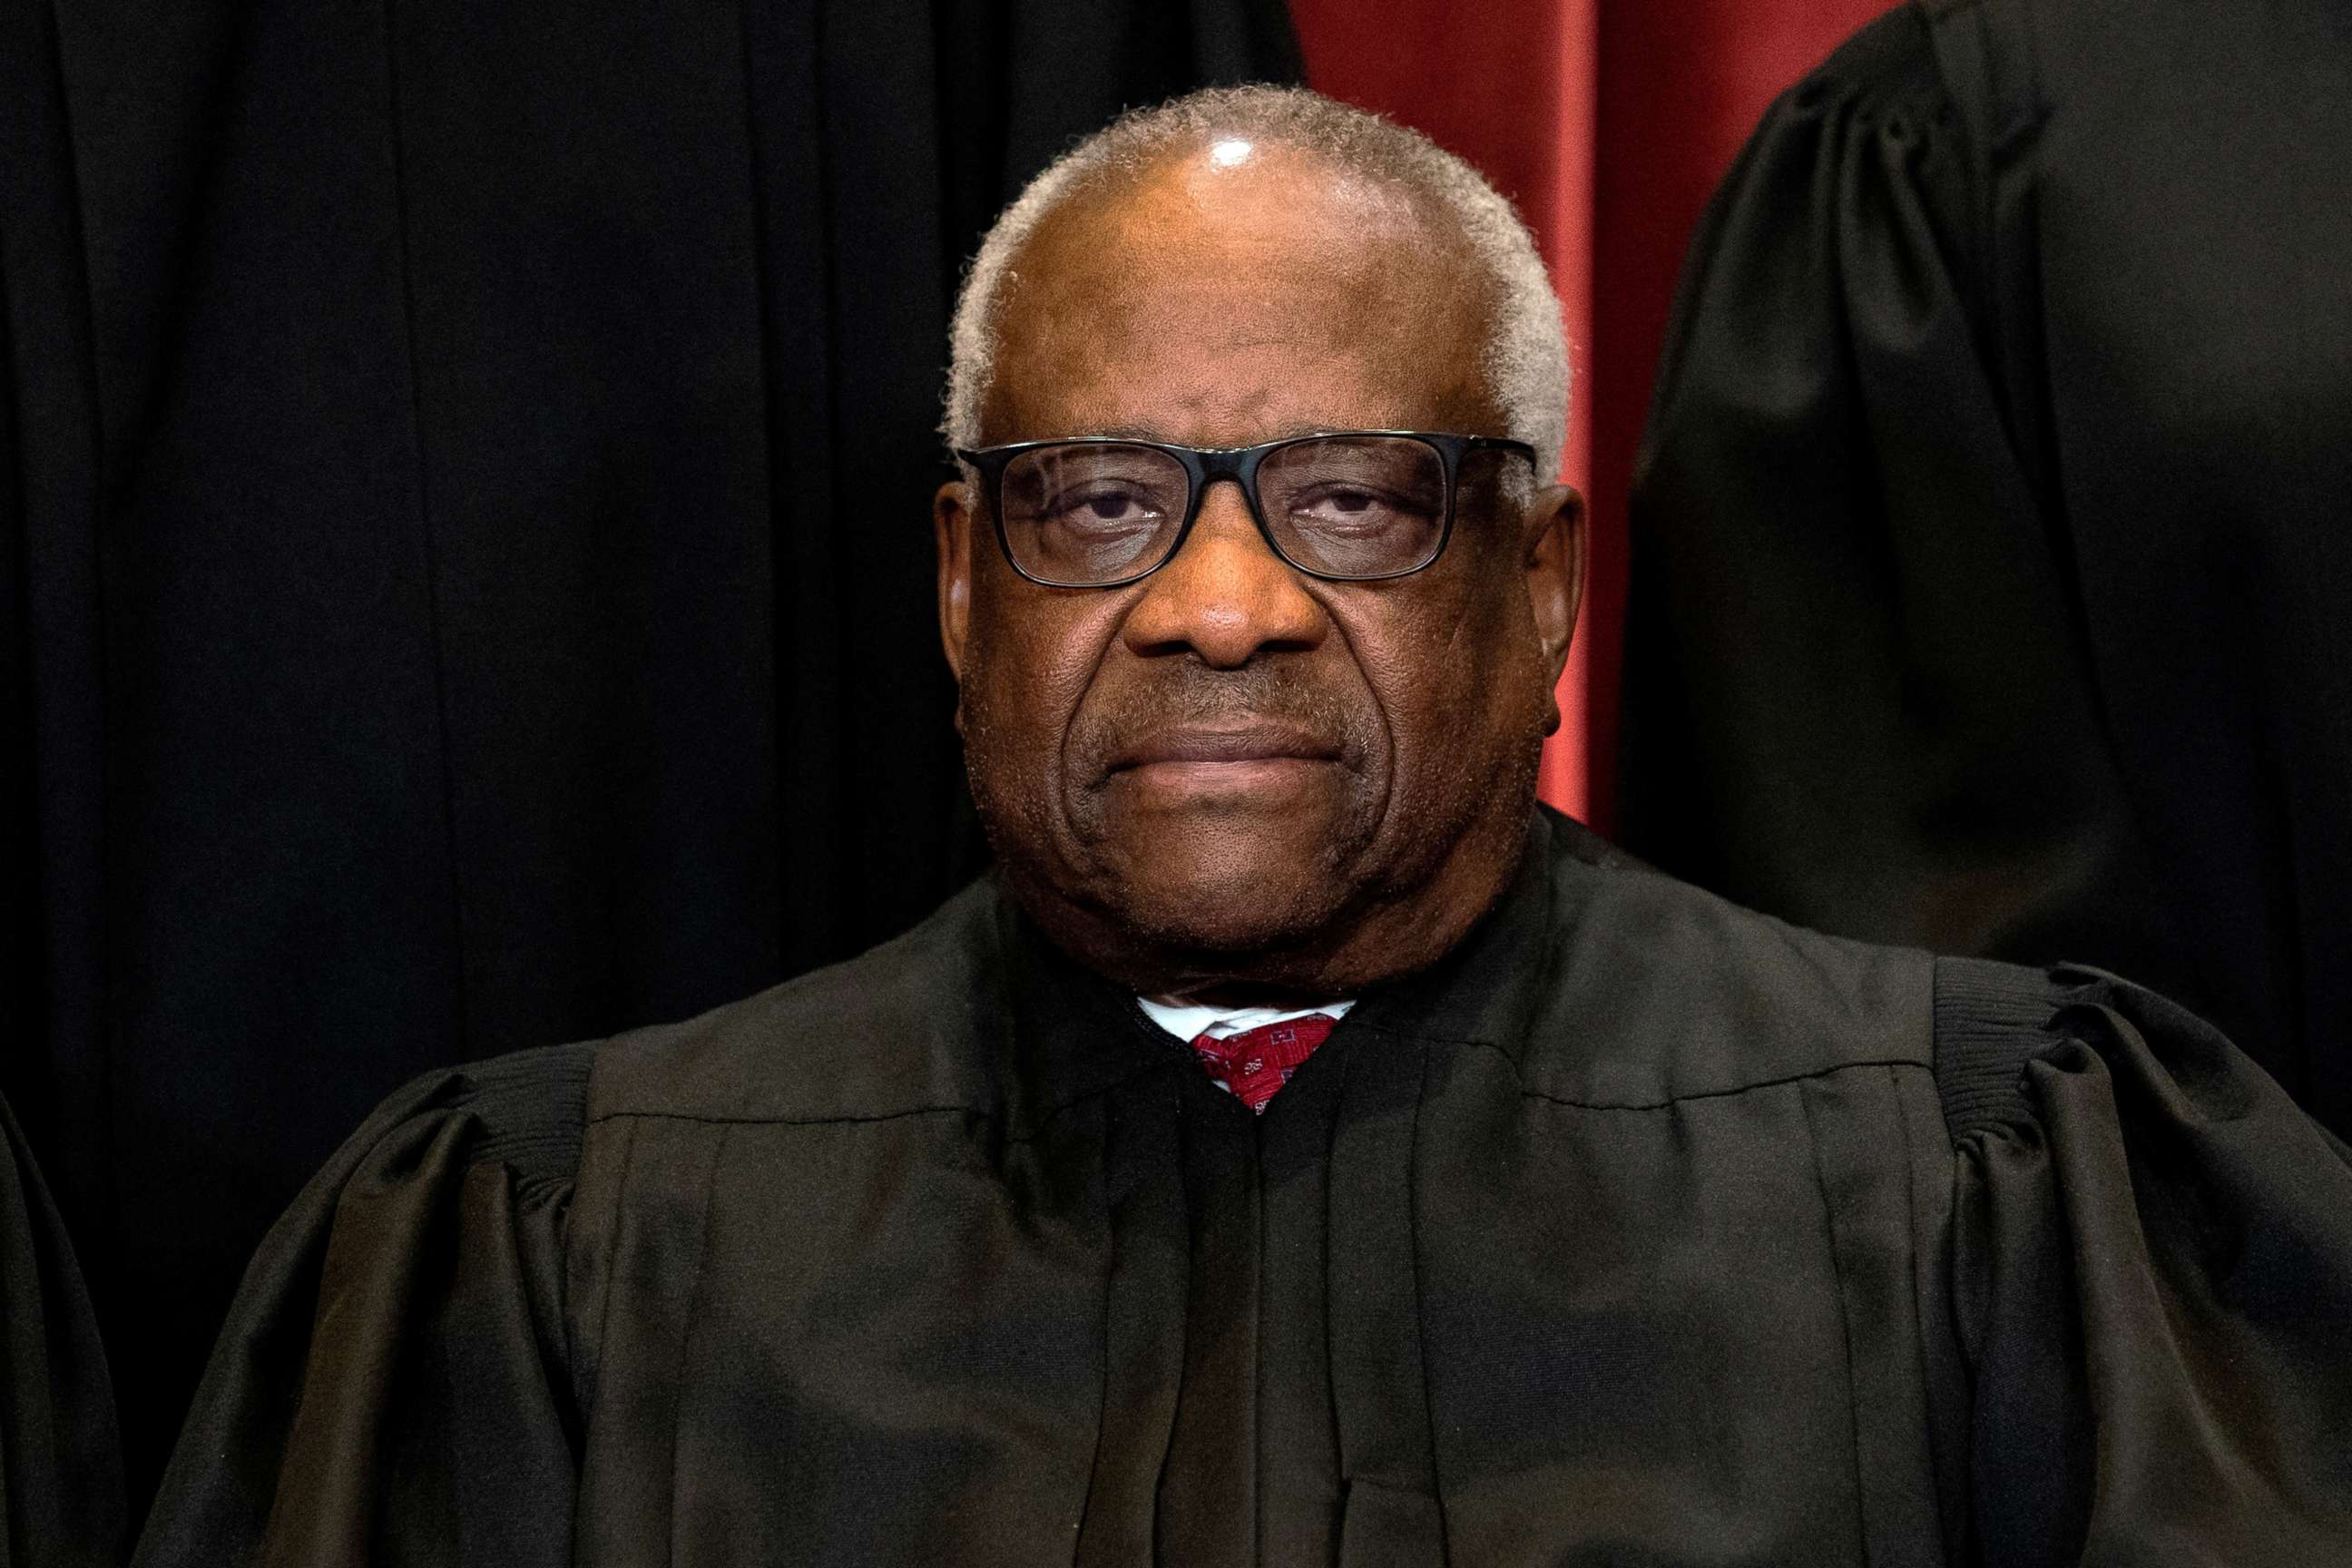 PHOTO: In this April 23, 2021, file photo, Associate Justice Clarence Thomas poses during a group photo of the Justices at the Supreme Court in Washington, D.C.